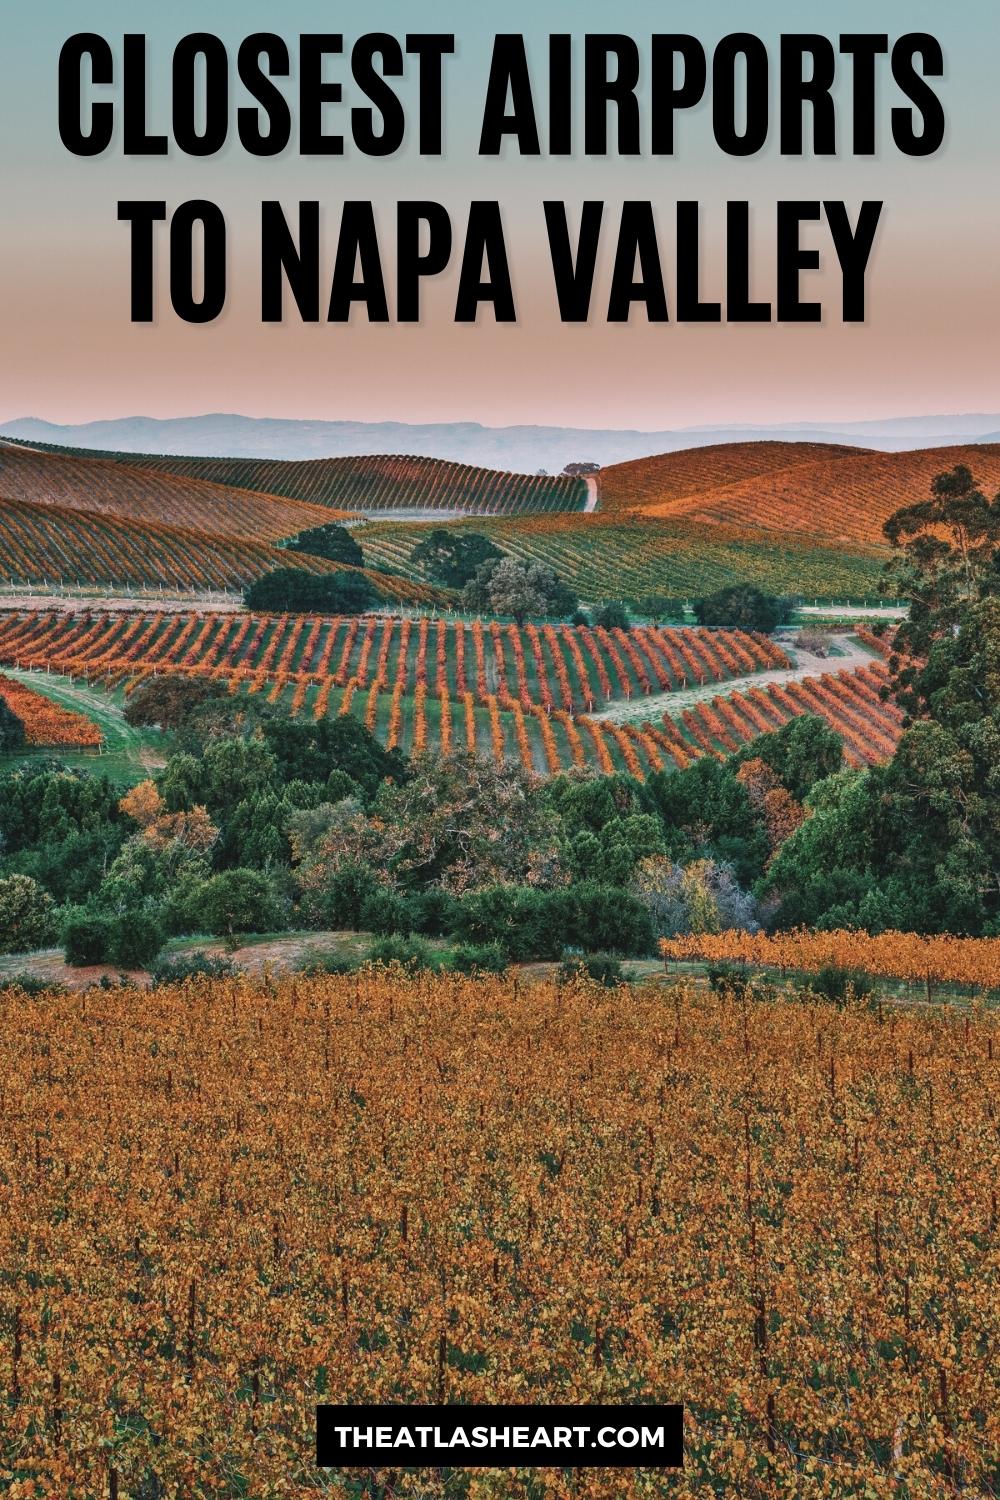 7 Closest Airports to Napa Valley [Plus Directions & Transport Options]